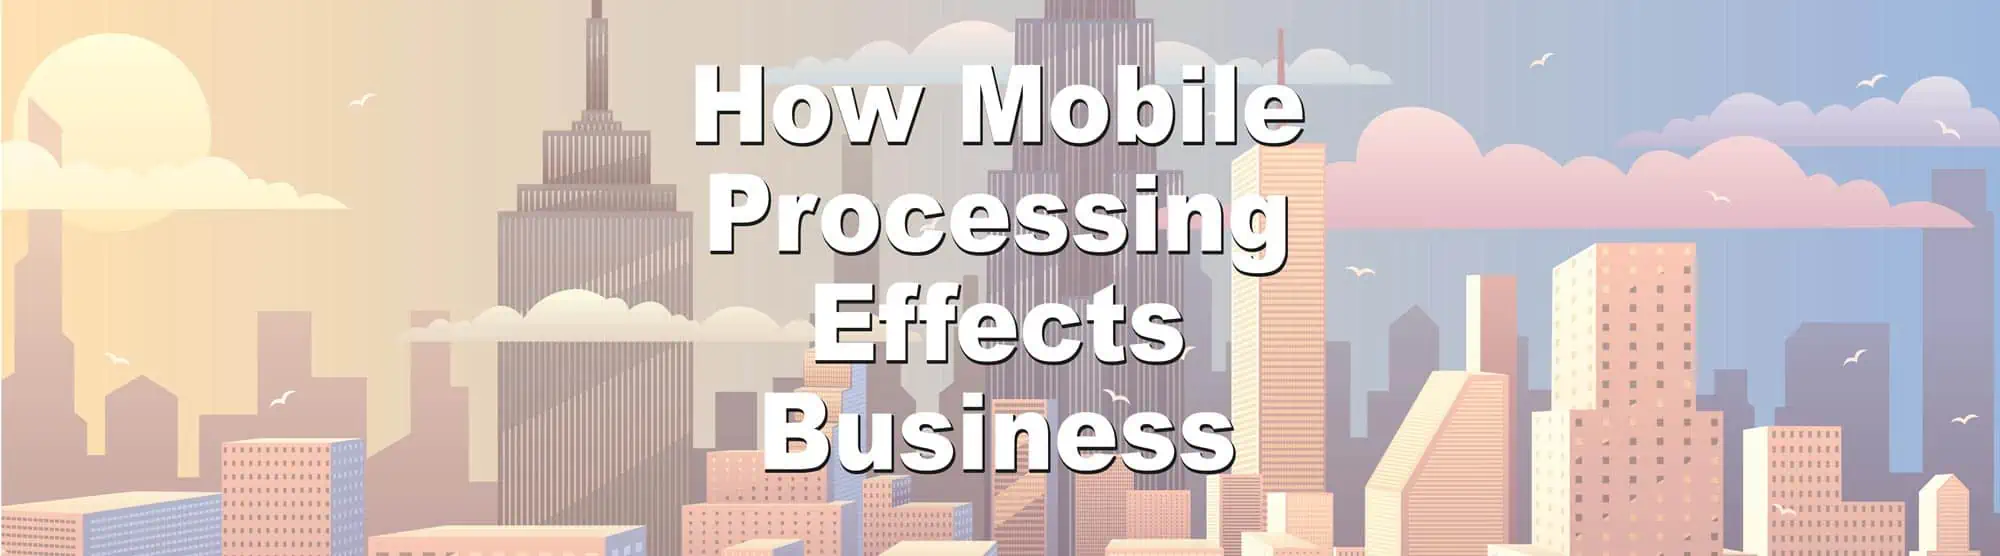 mobile payment processing helps business